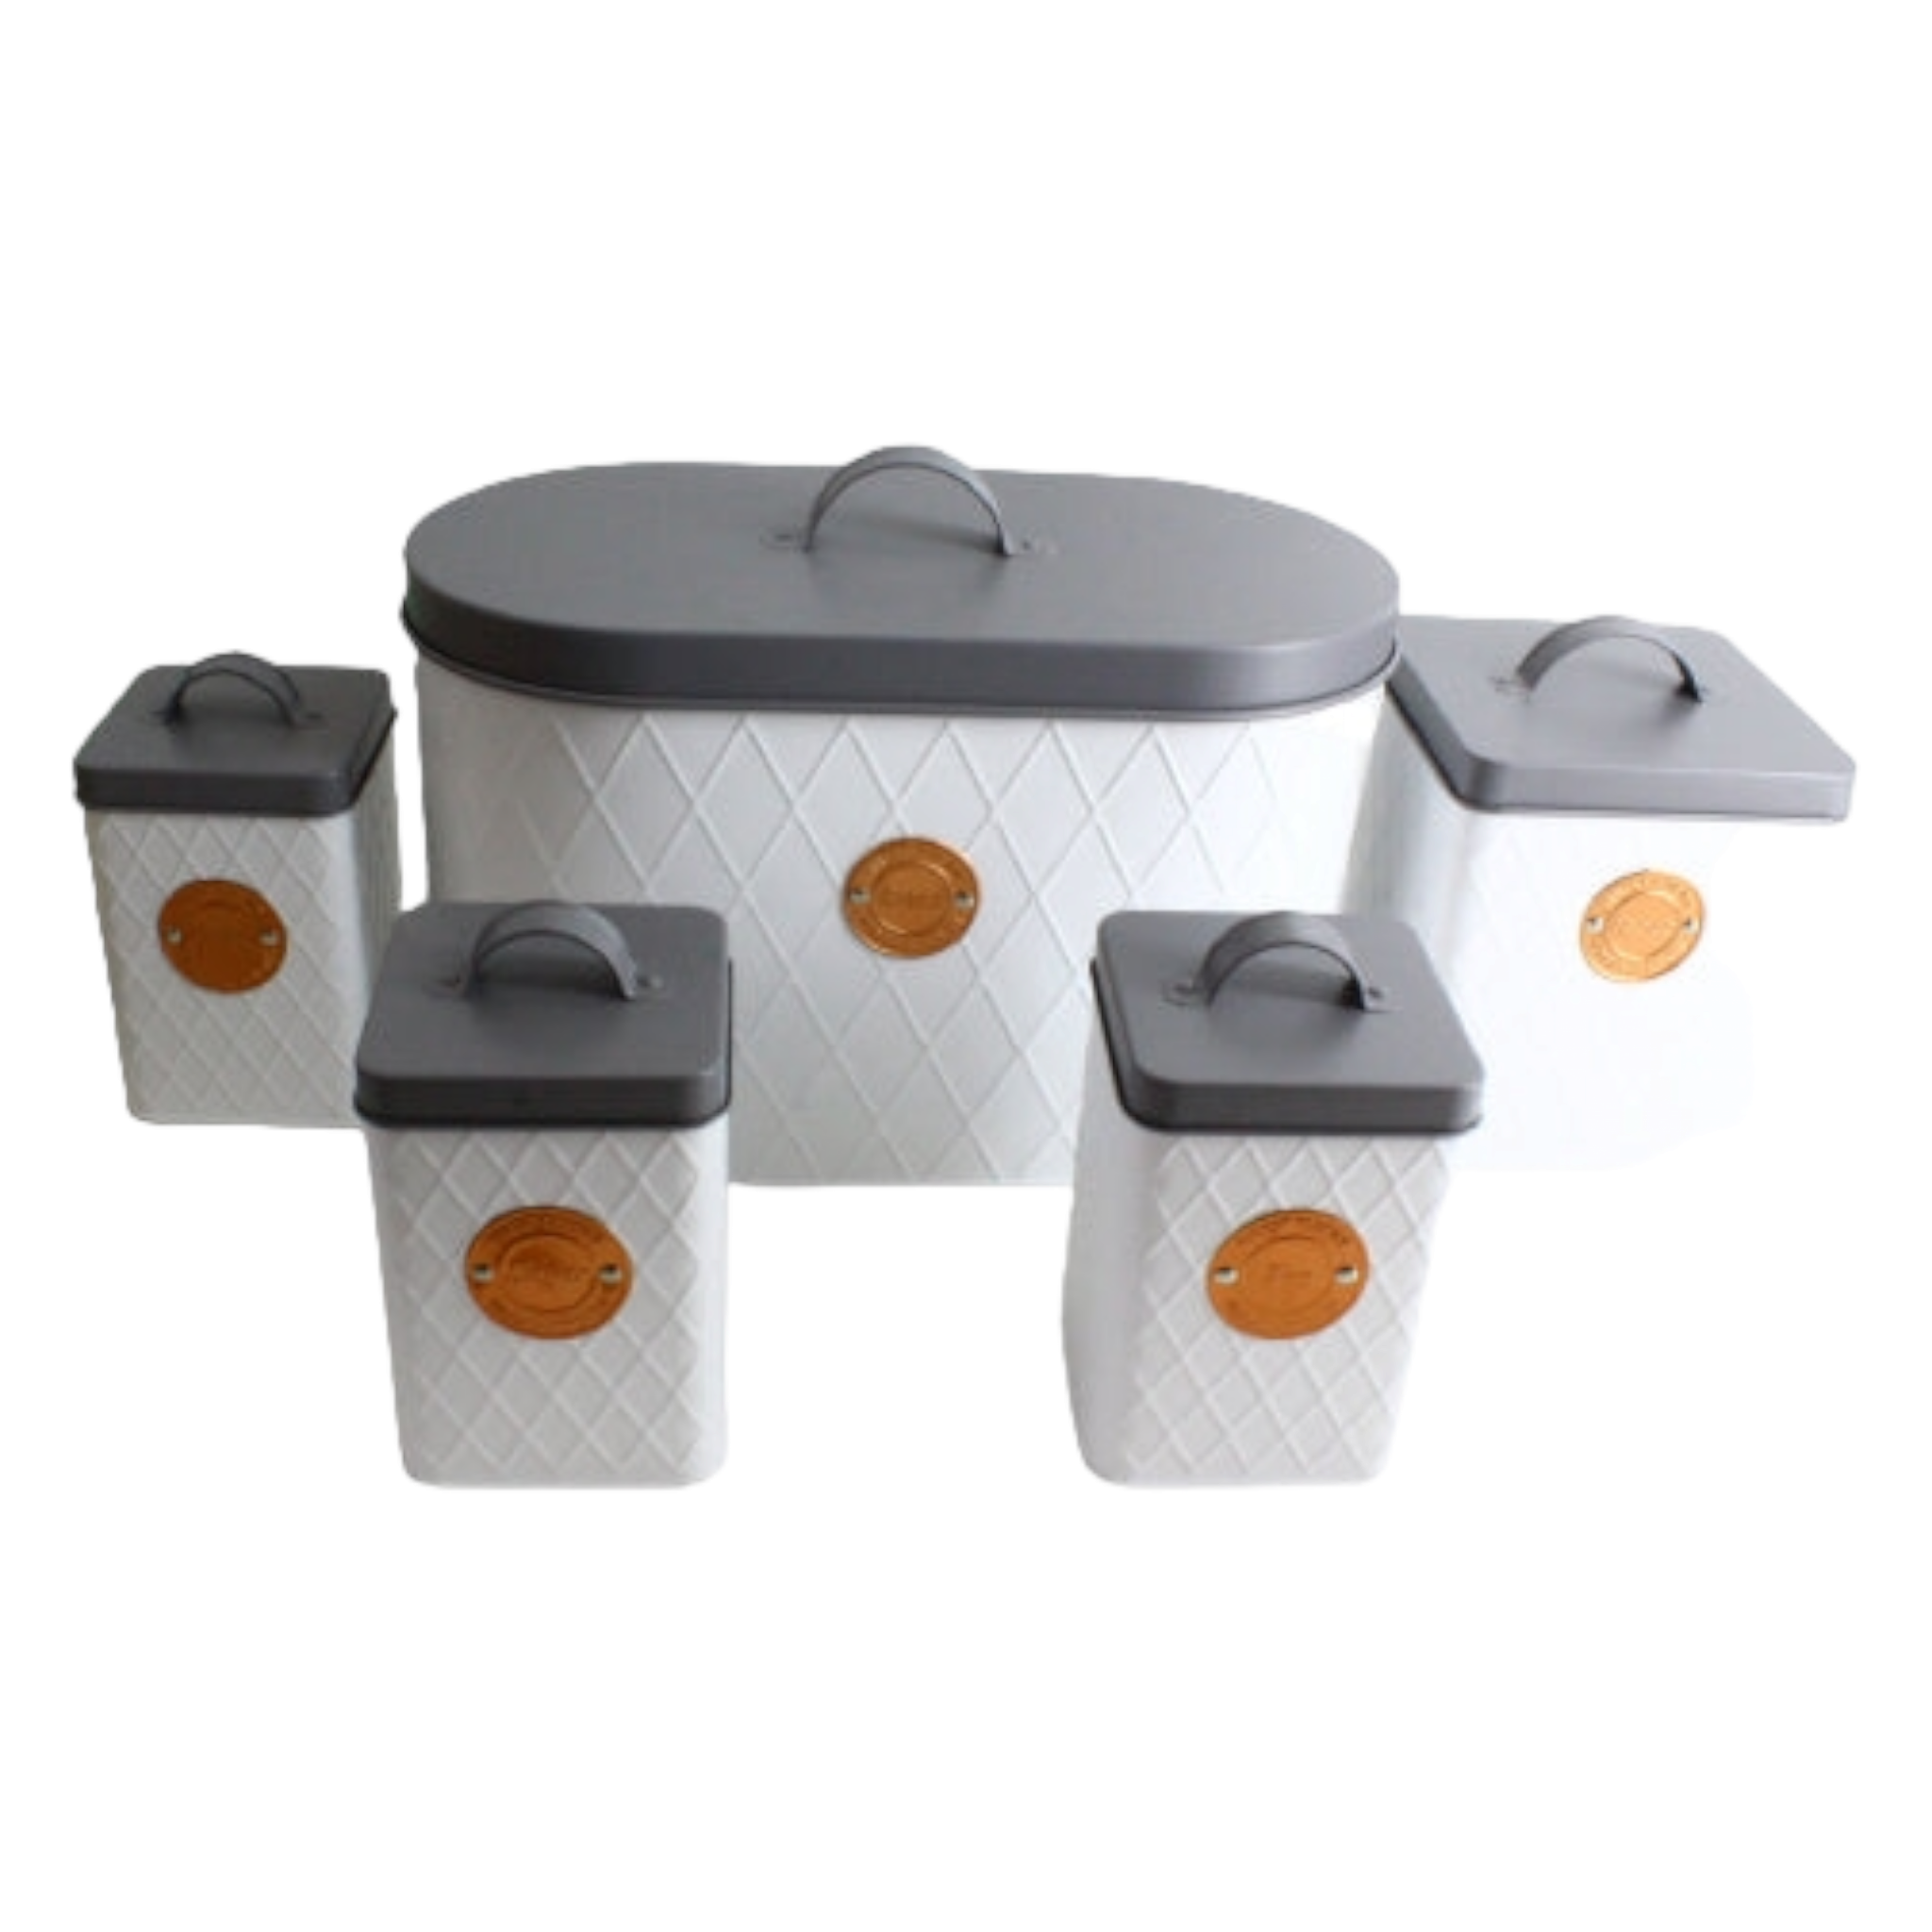 Bread Bin with Canisters 5pc Set HV158